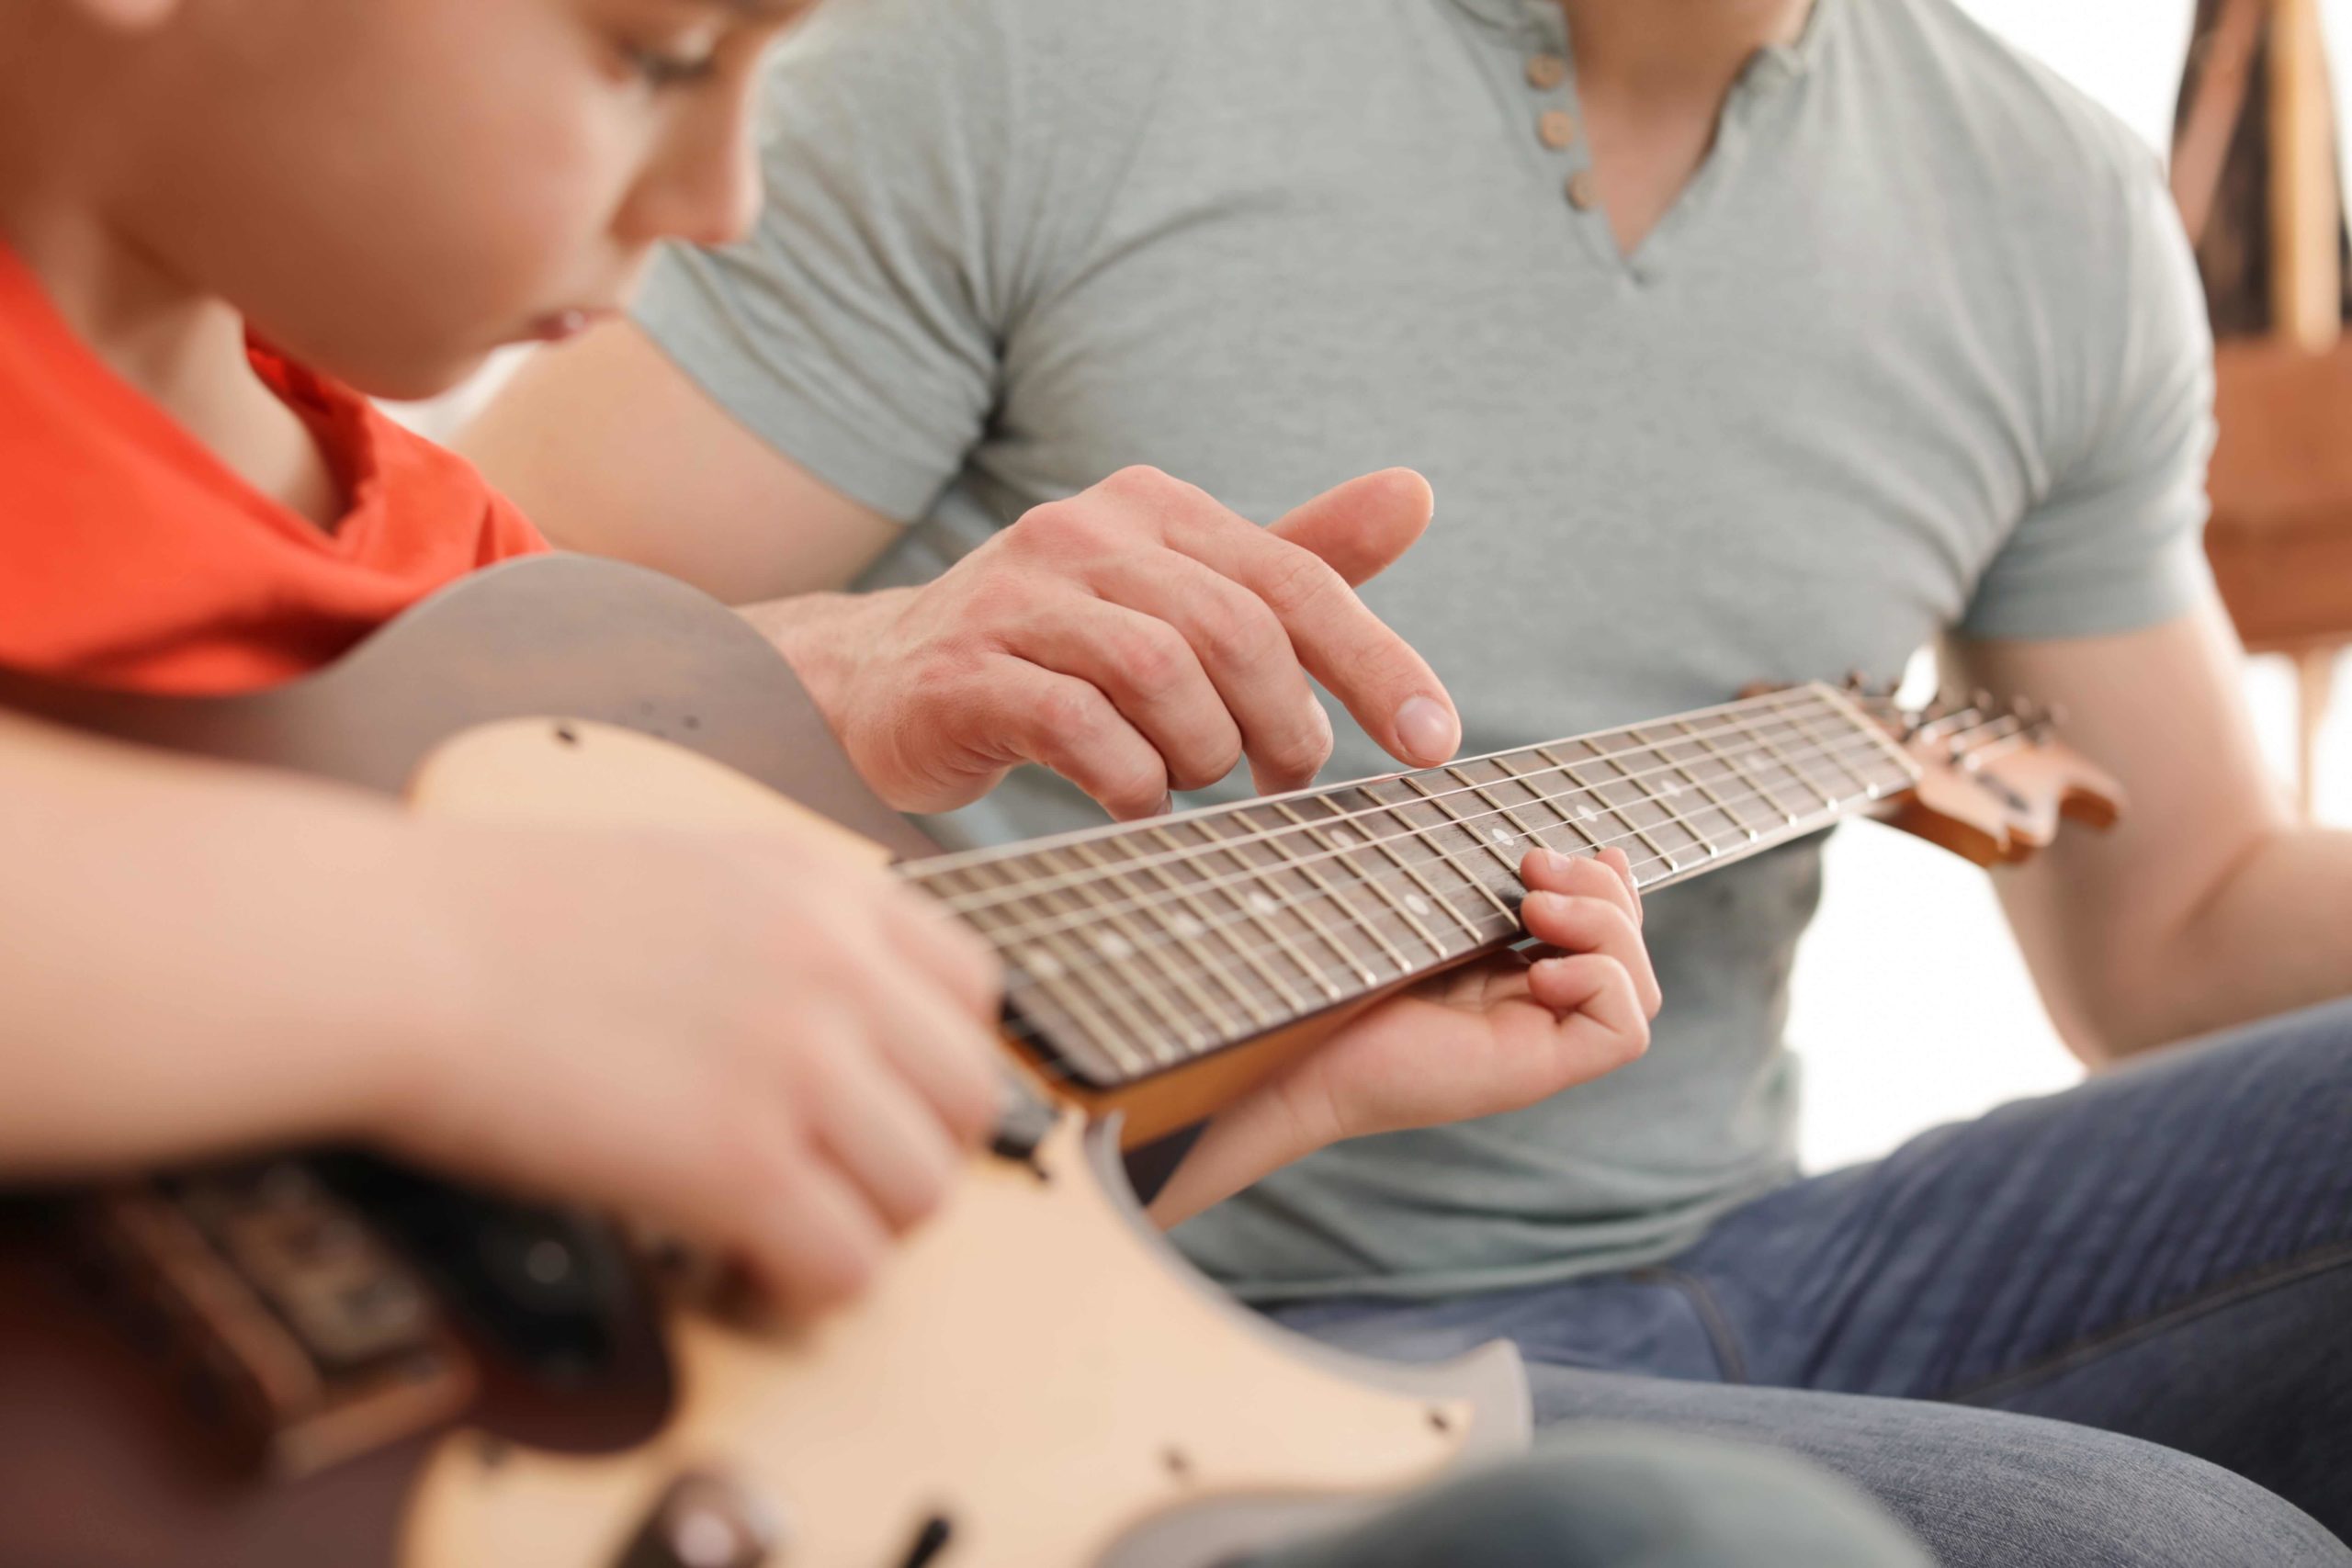 A kid learning guitar from a man